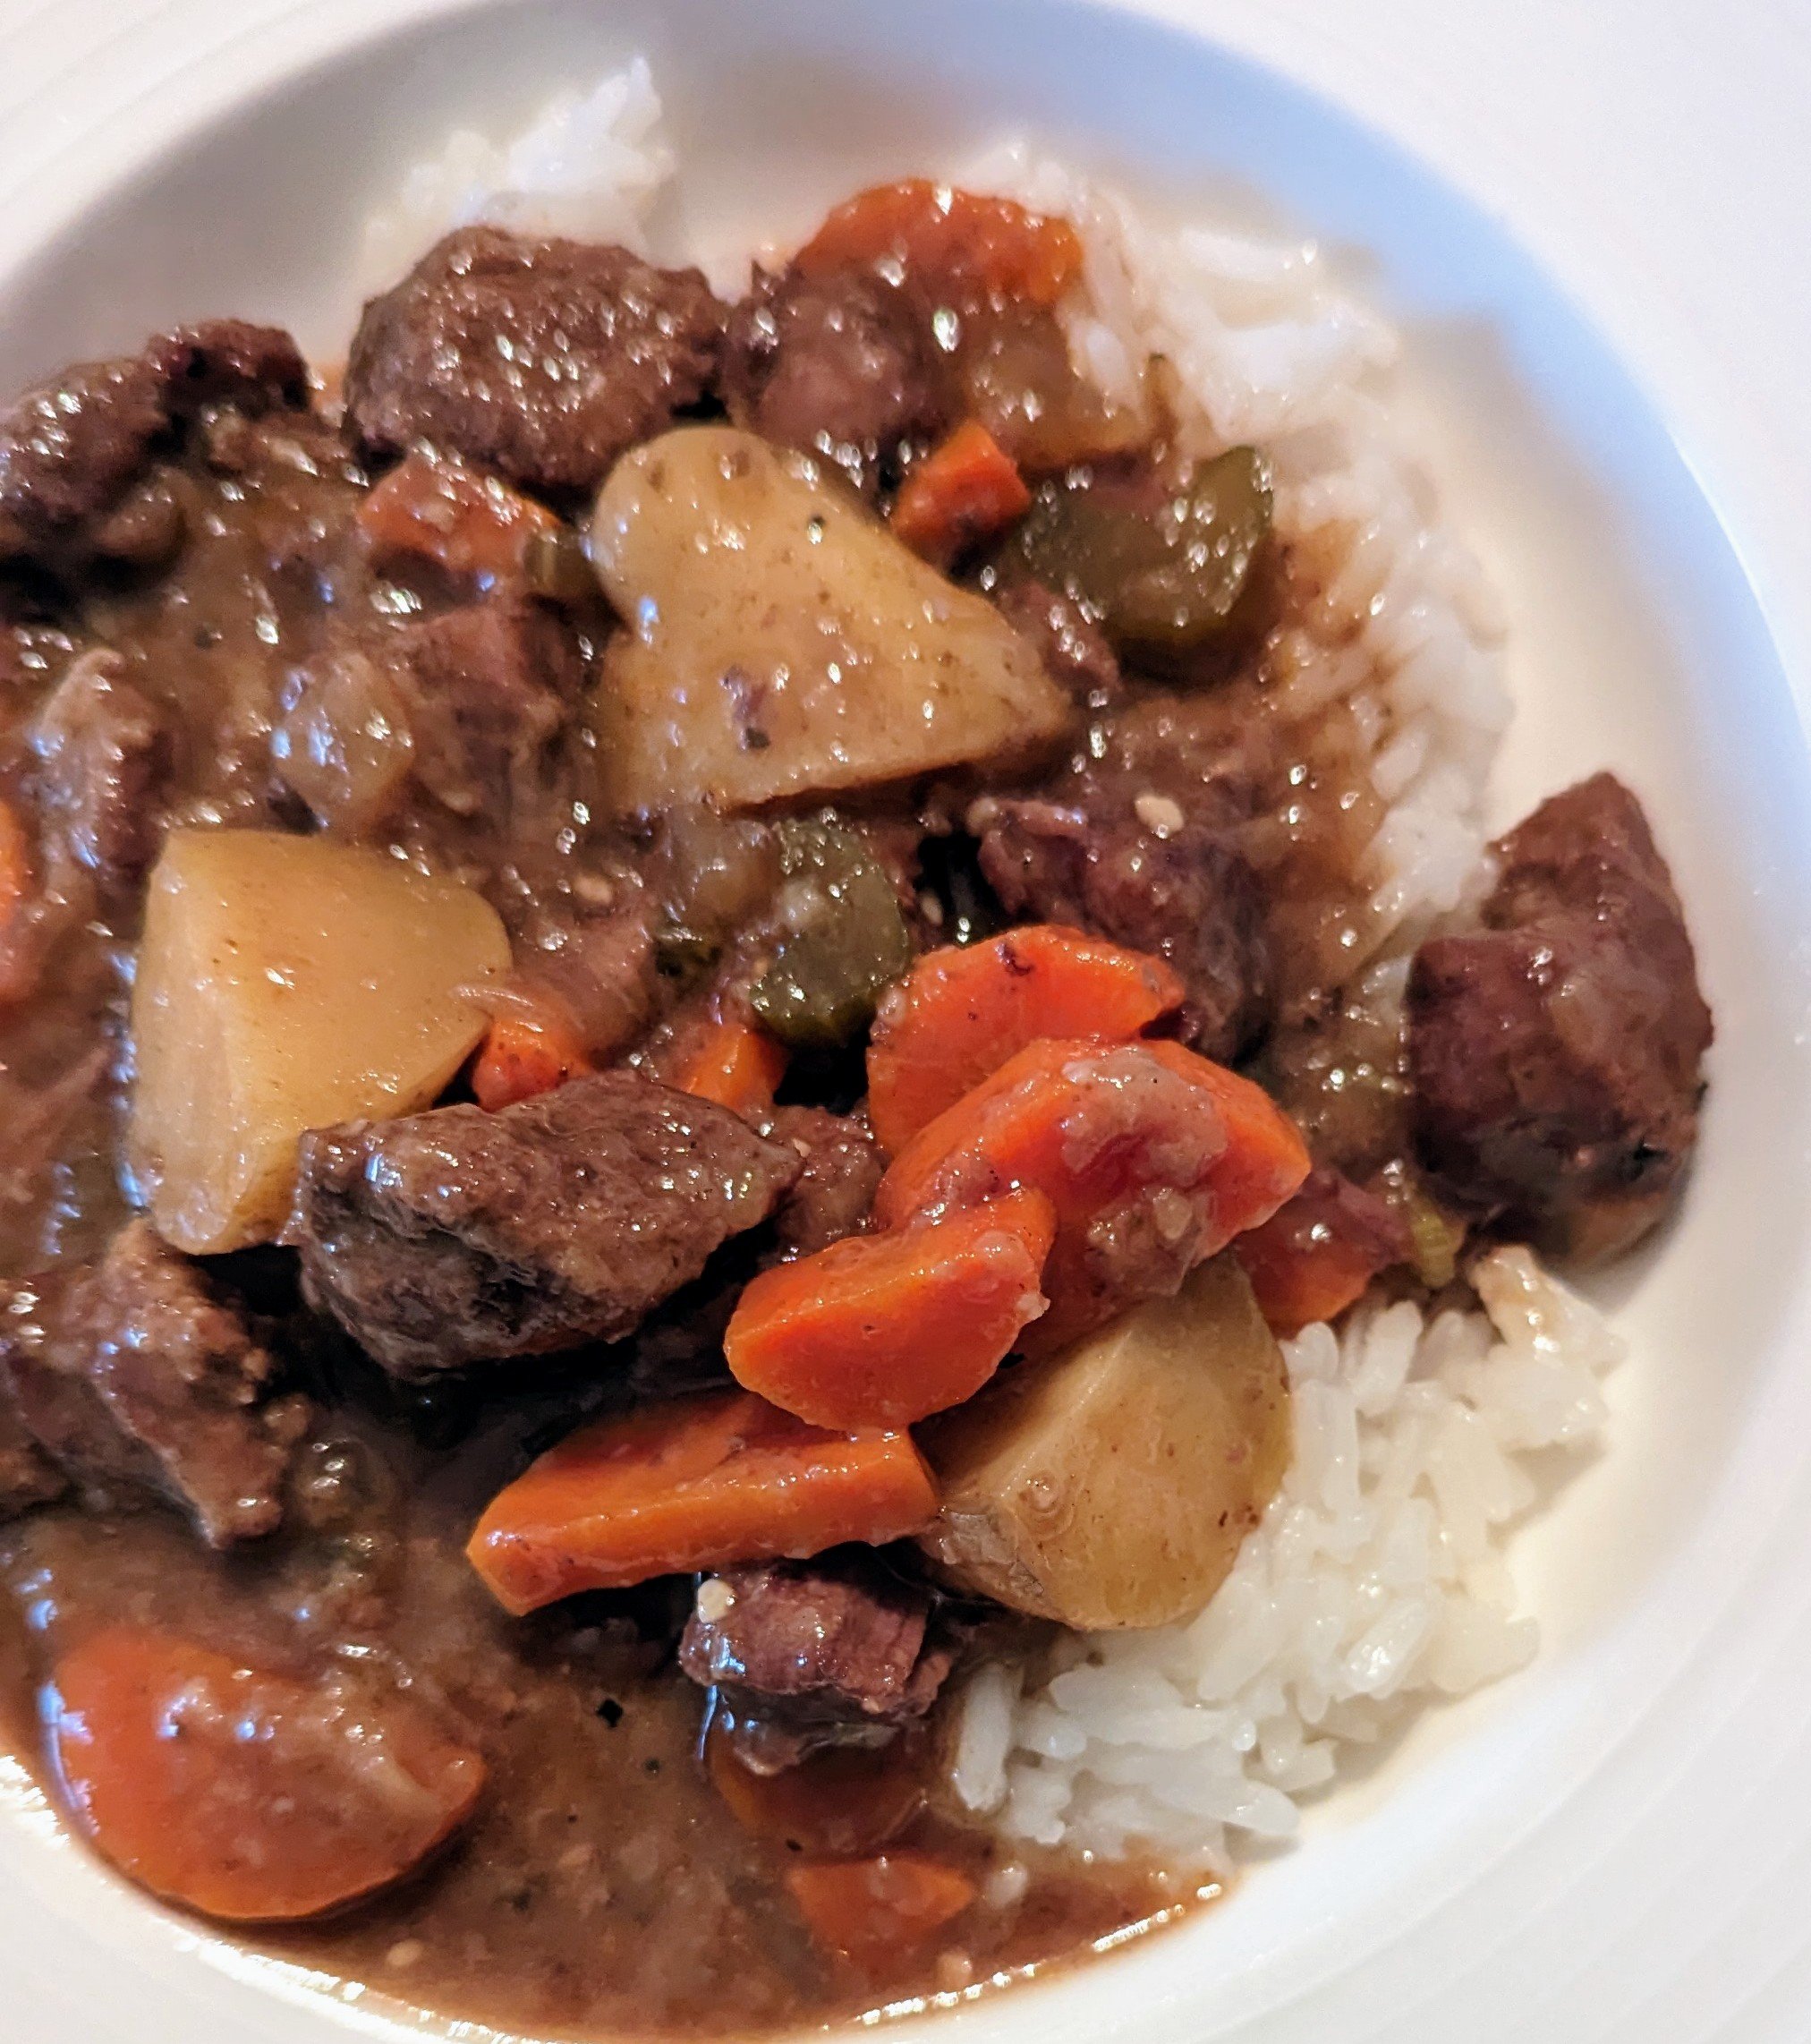 THE BEST BEEF STEW IN THE CROCKPOT